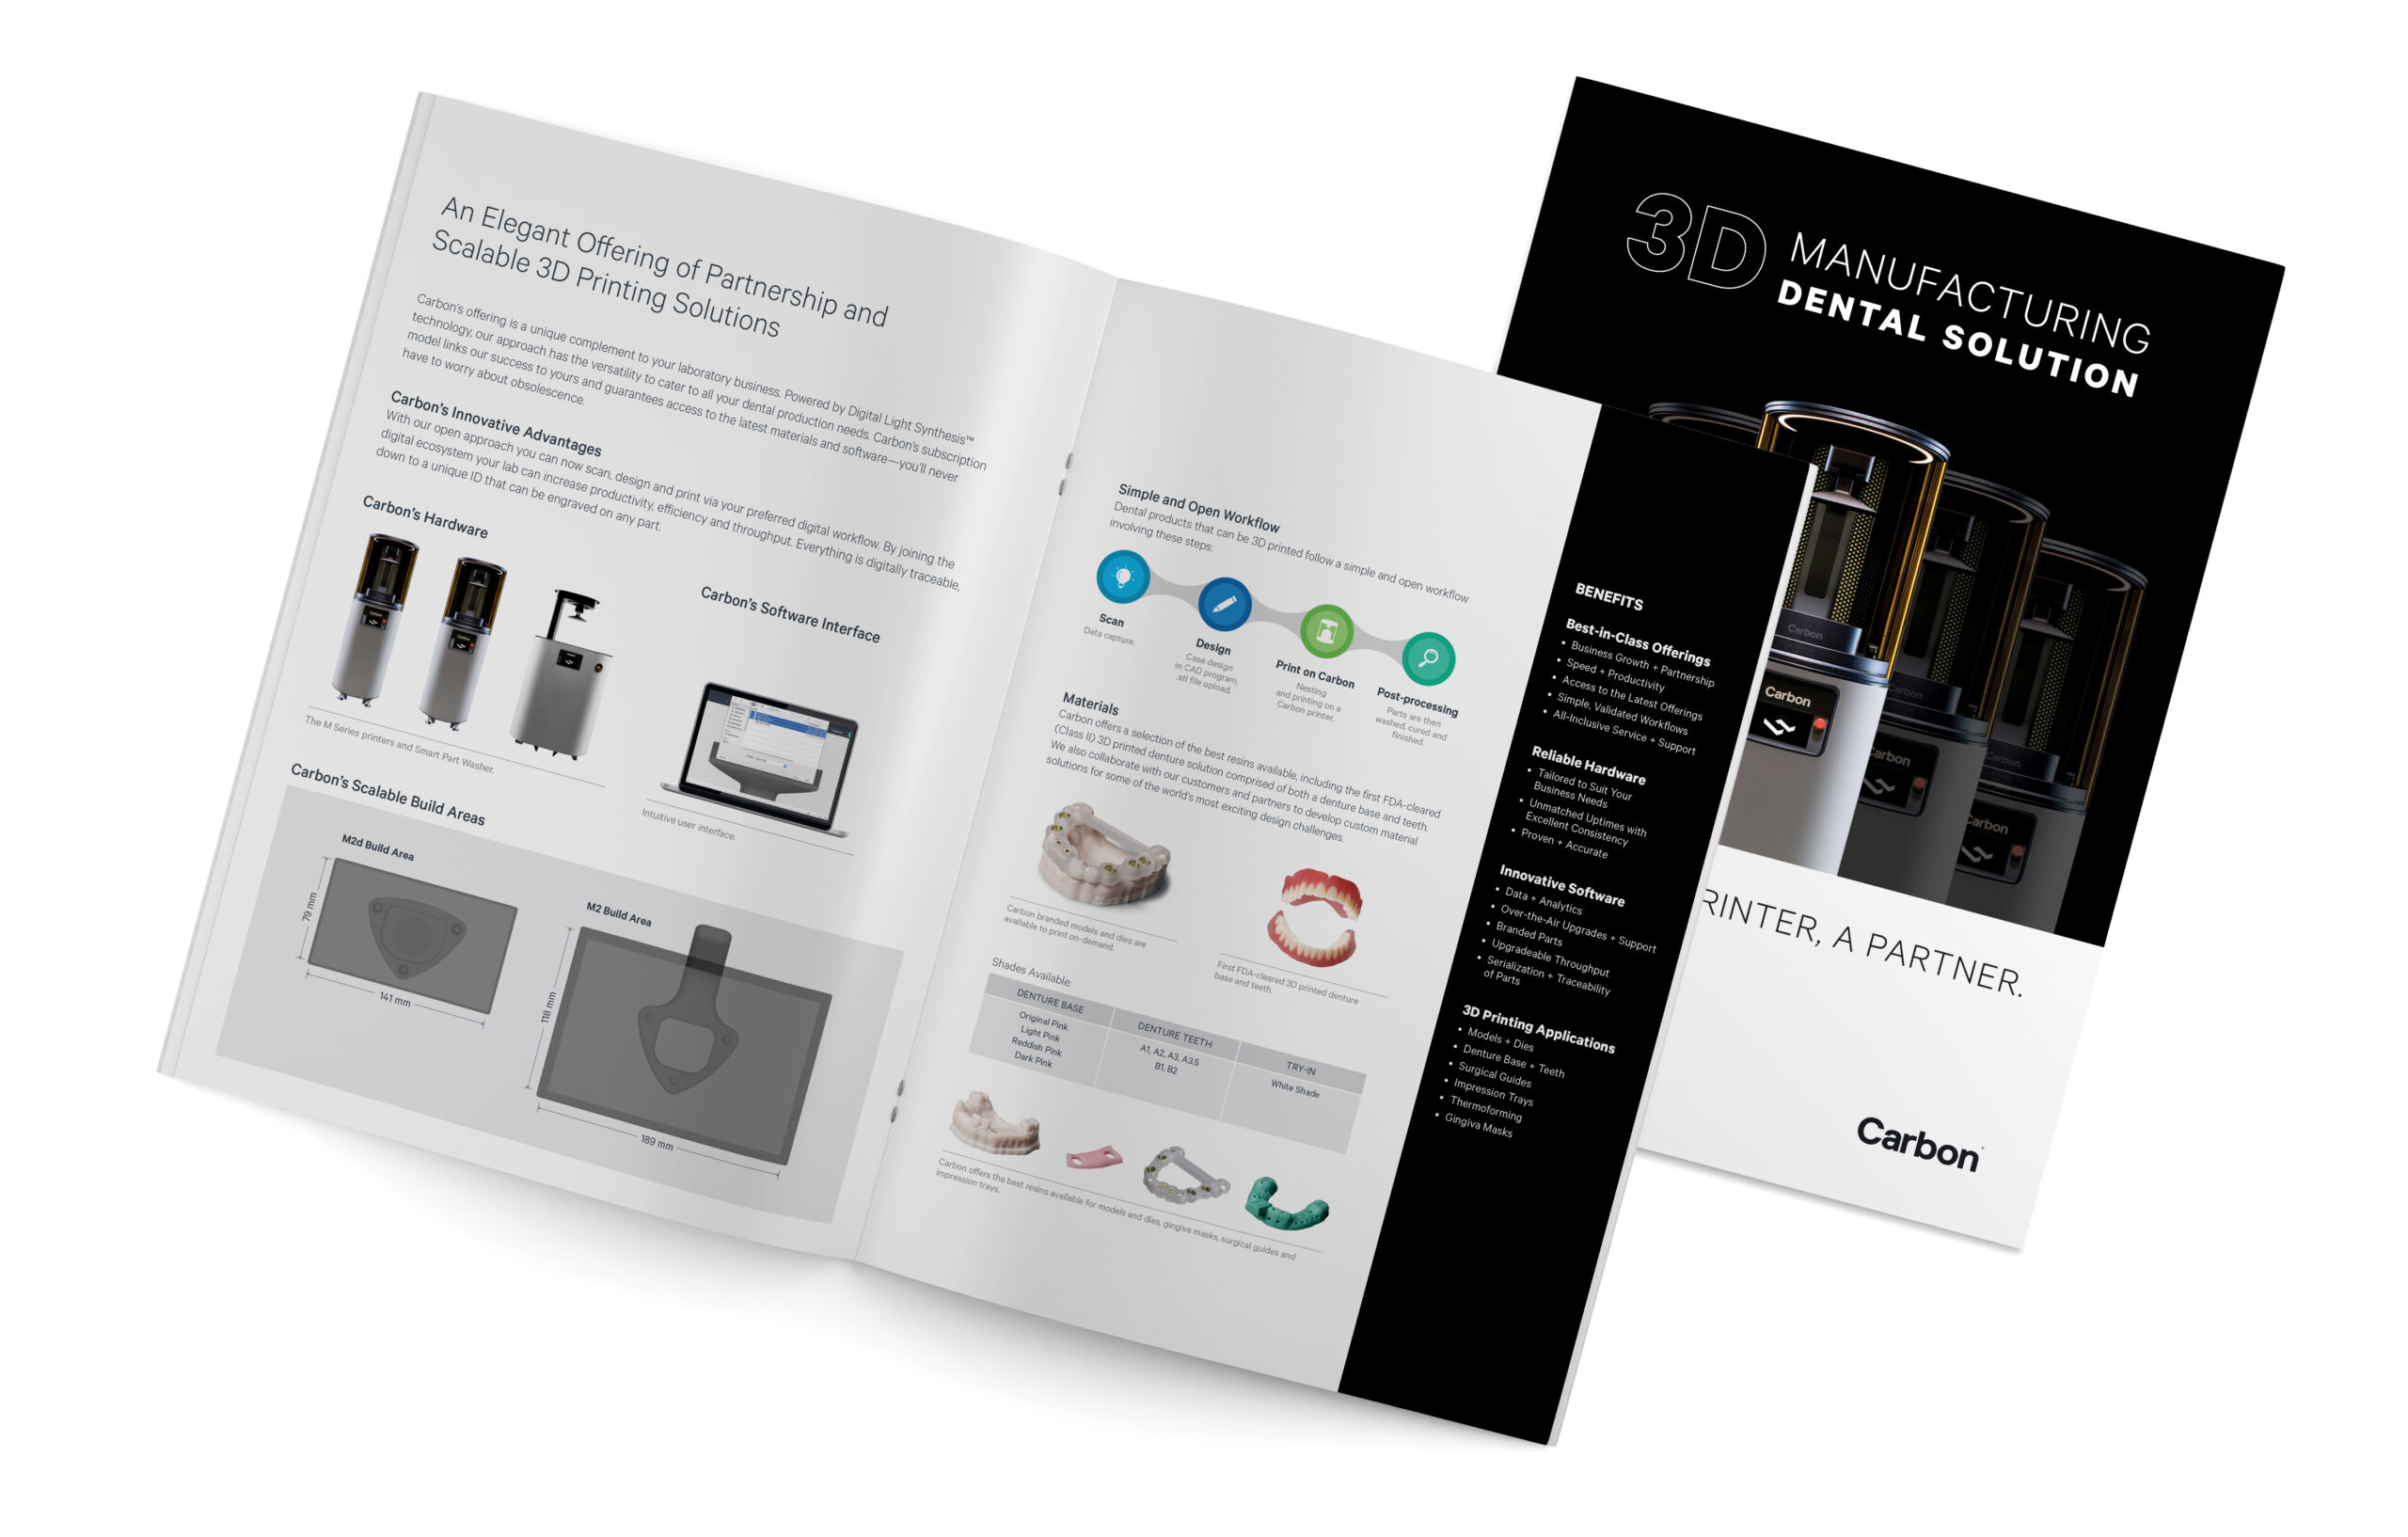 This high-level brochure was produced in a four page (shown) and size page design explaining the benefits of Carbon 3D printing to the dental market.